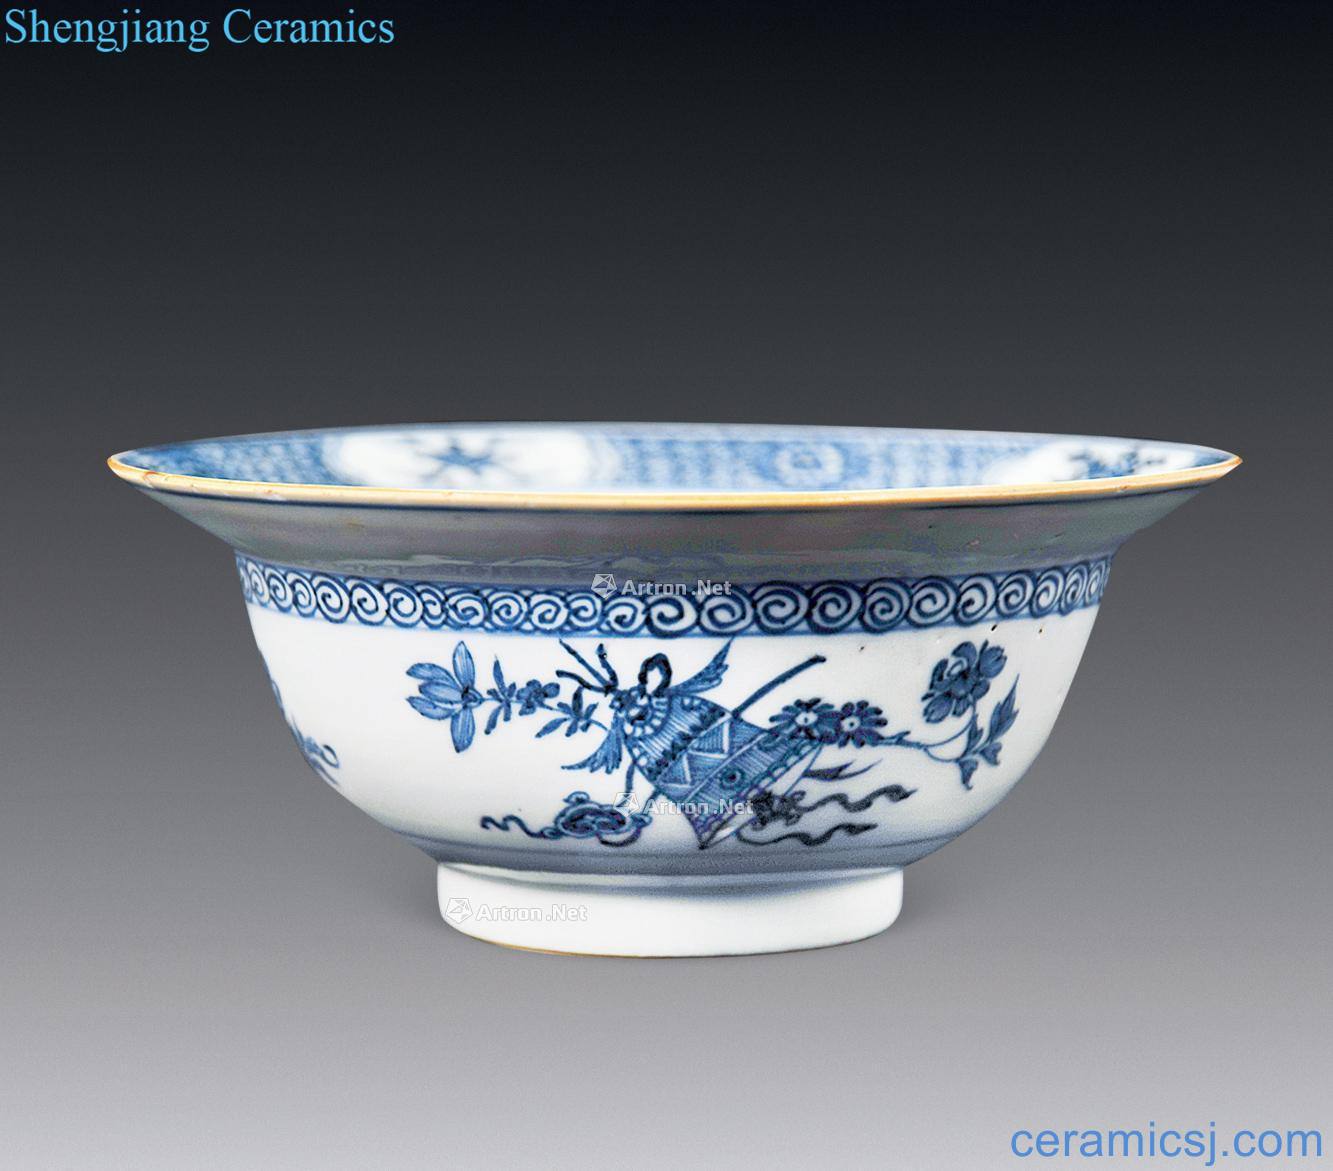 In the qing dynasty Blue and white flower tattoos cuffed bowl